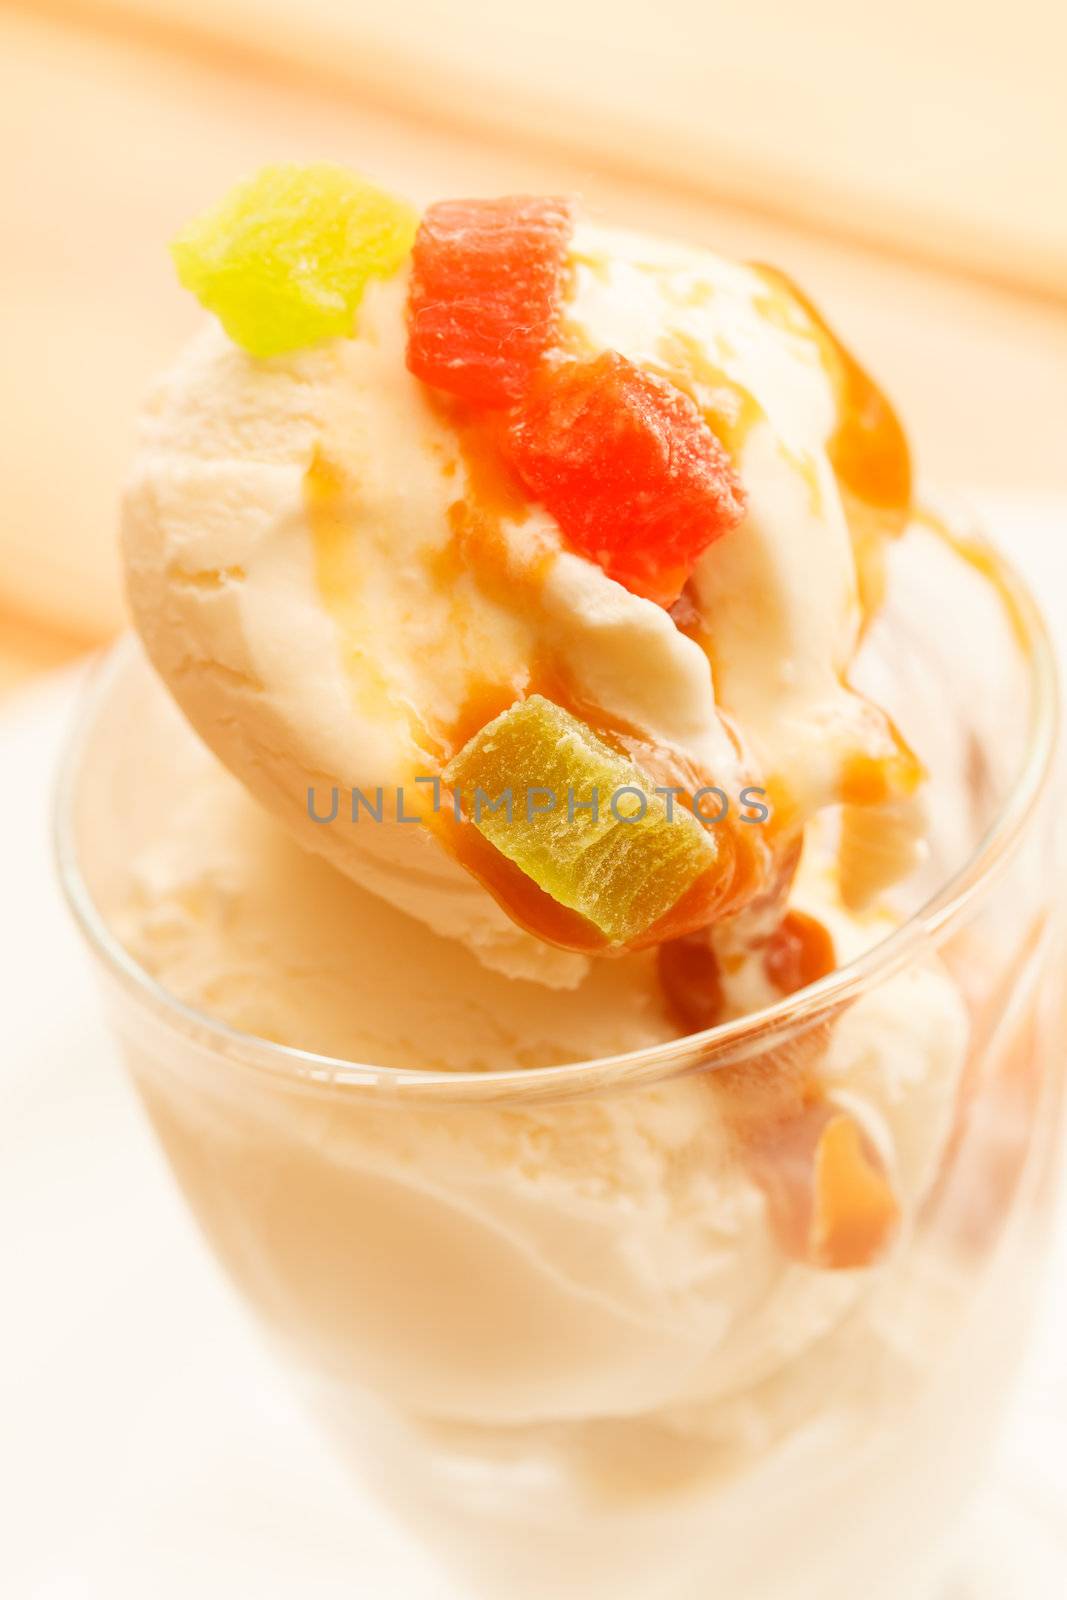 ice cream and tropical fruits by shebeko